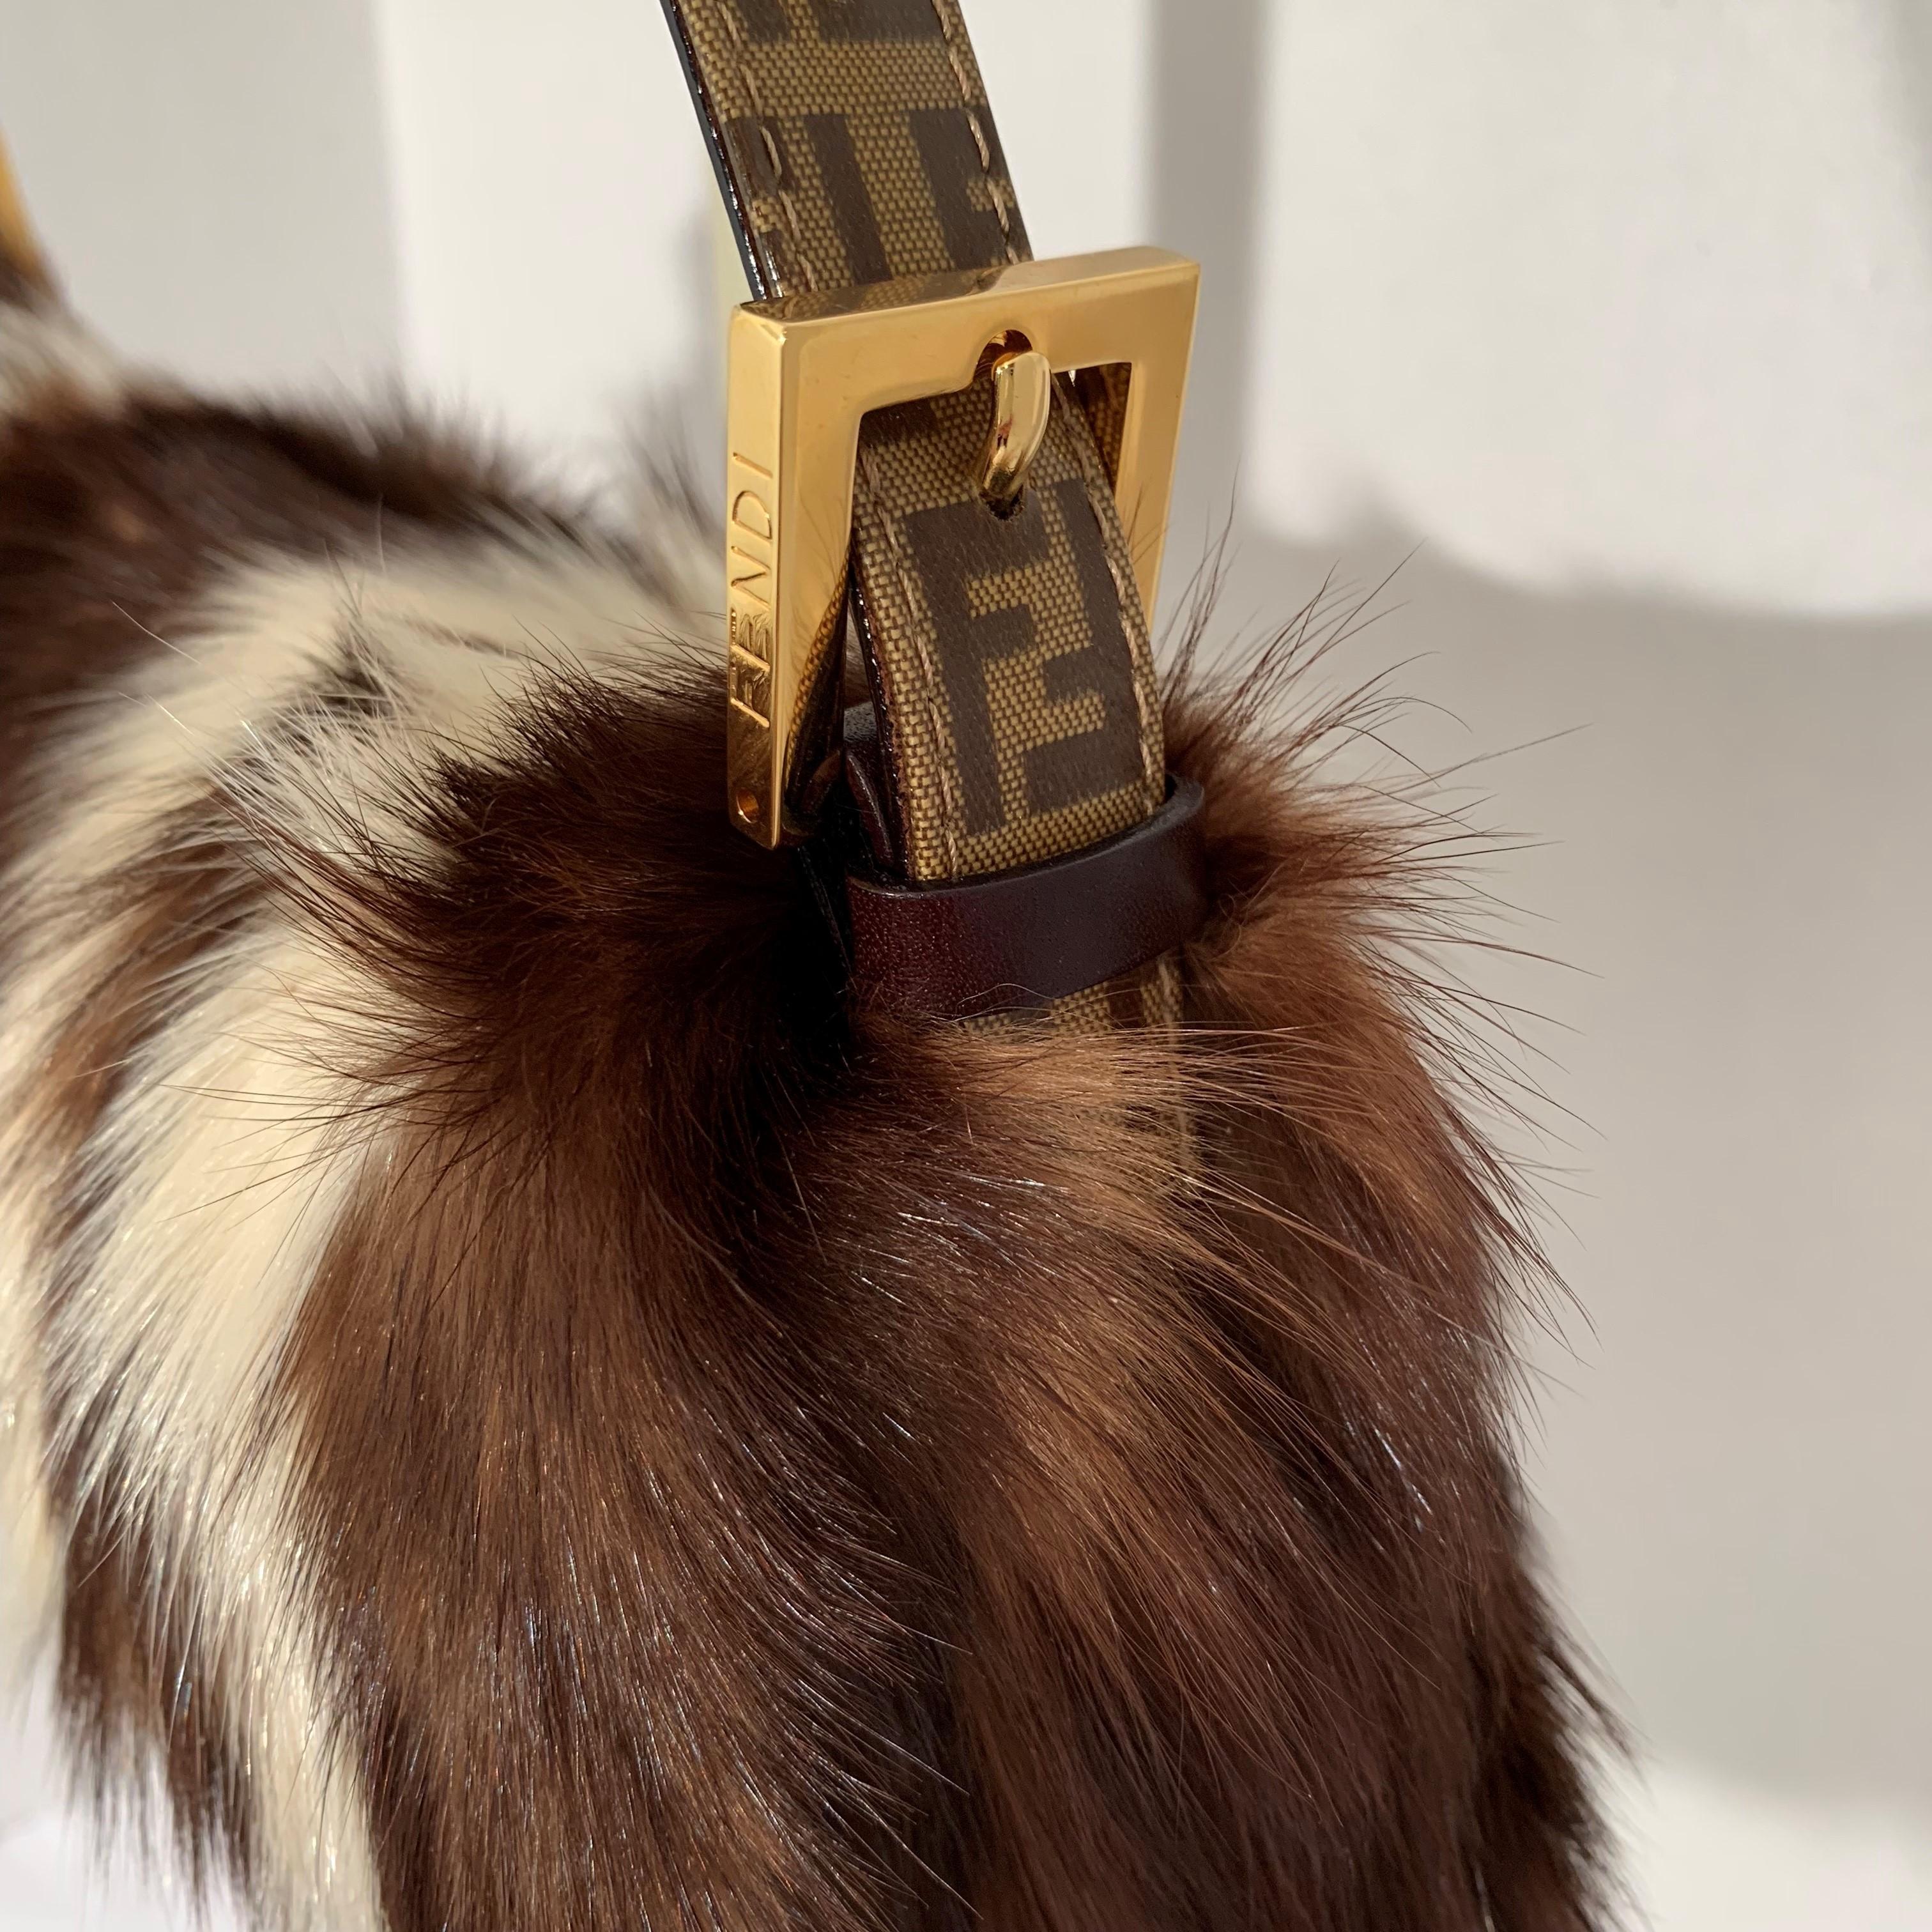 Brown New Rare Fendi Fur Baguette Bag Featured in the 15th Anniversary Book Lt Edition